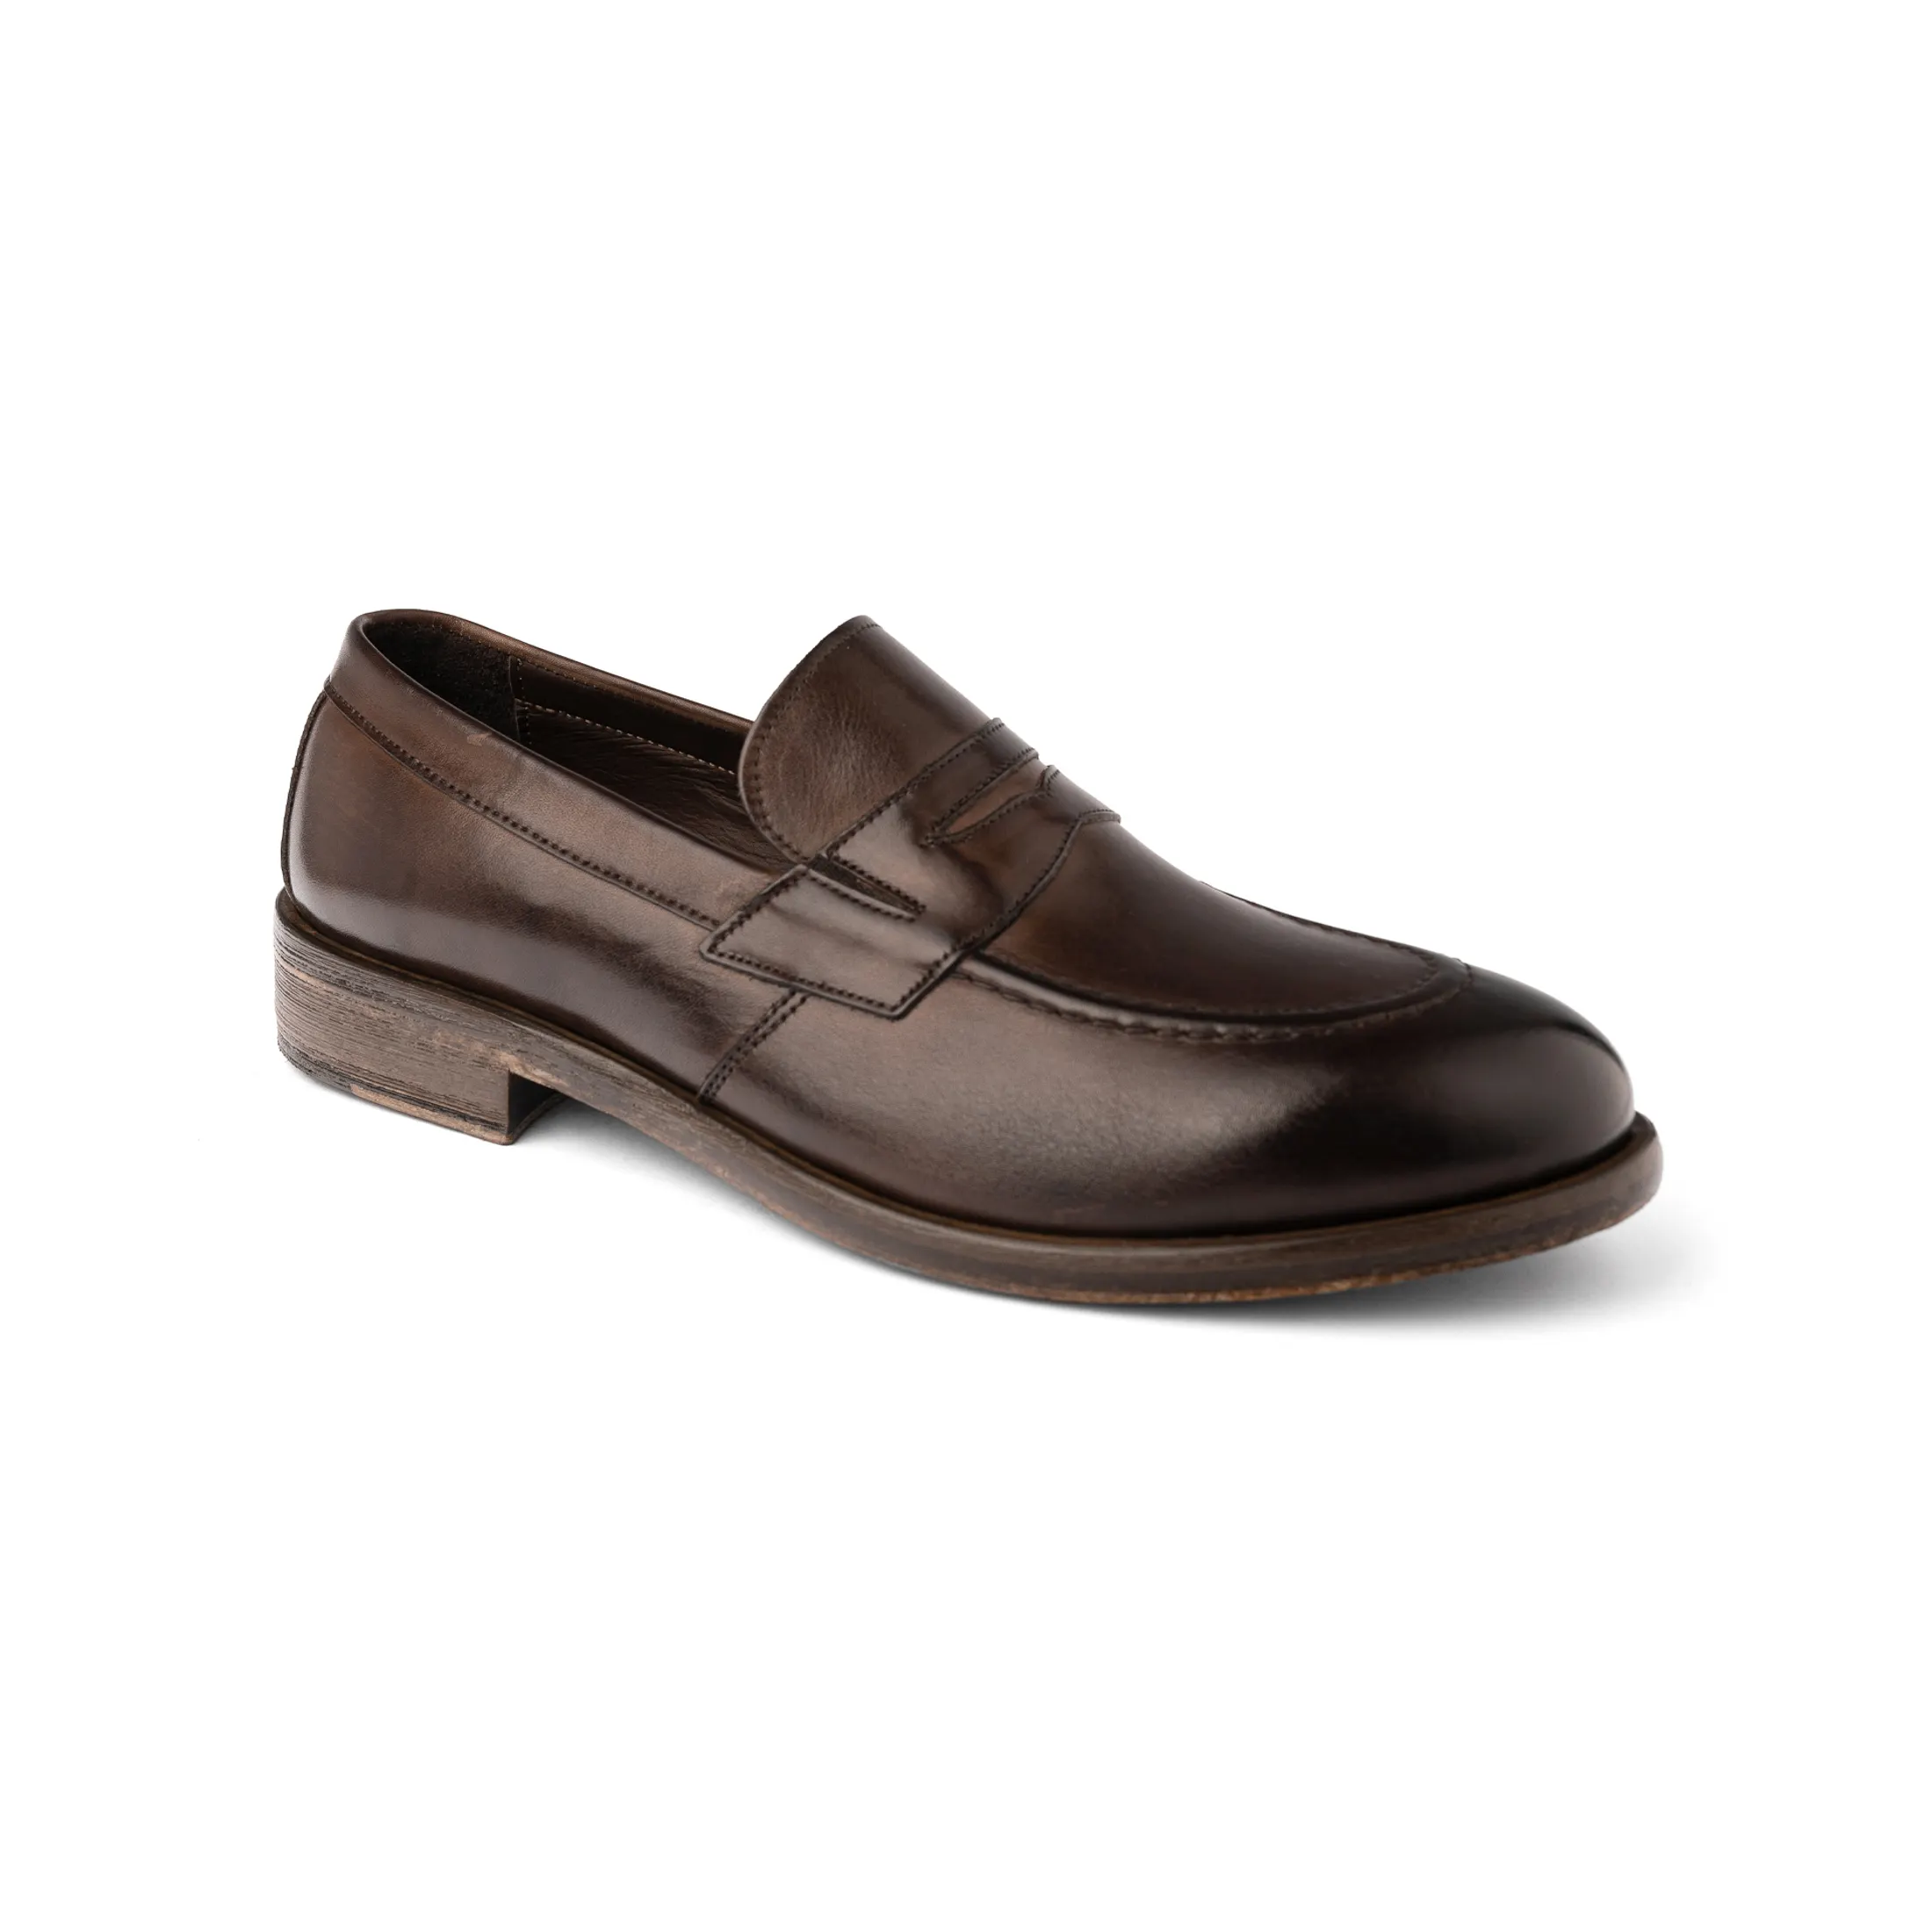 Made in Italy Men Loafer Shoe in Dark Brown color Calf Leather Upper Leather and rubber anti slip Outsole Dress